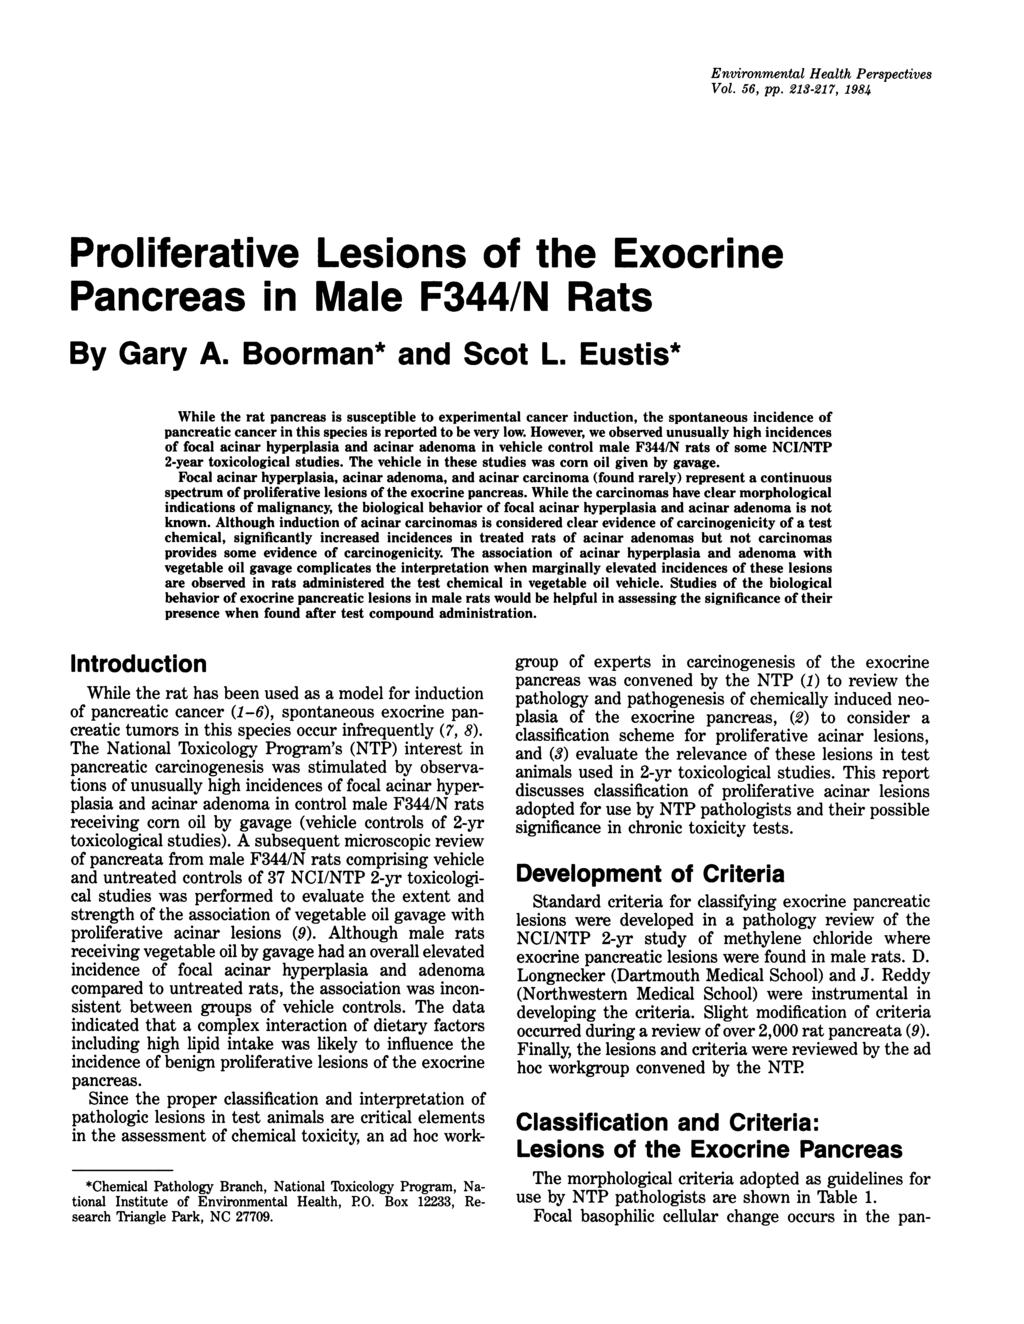 Environmental Health Perspectives Vol. 56, pp. 213-217, 1984 Proliferative Lesions of the Exocrine Pancreas in Male F344/N Rats By Gary A. Boorman* and Scot L.